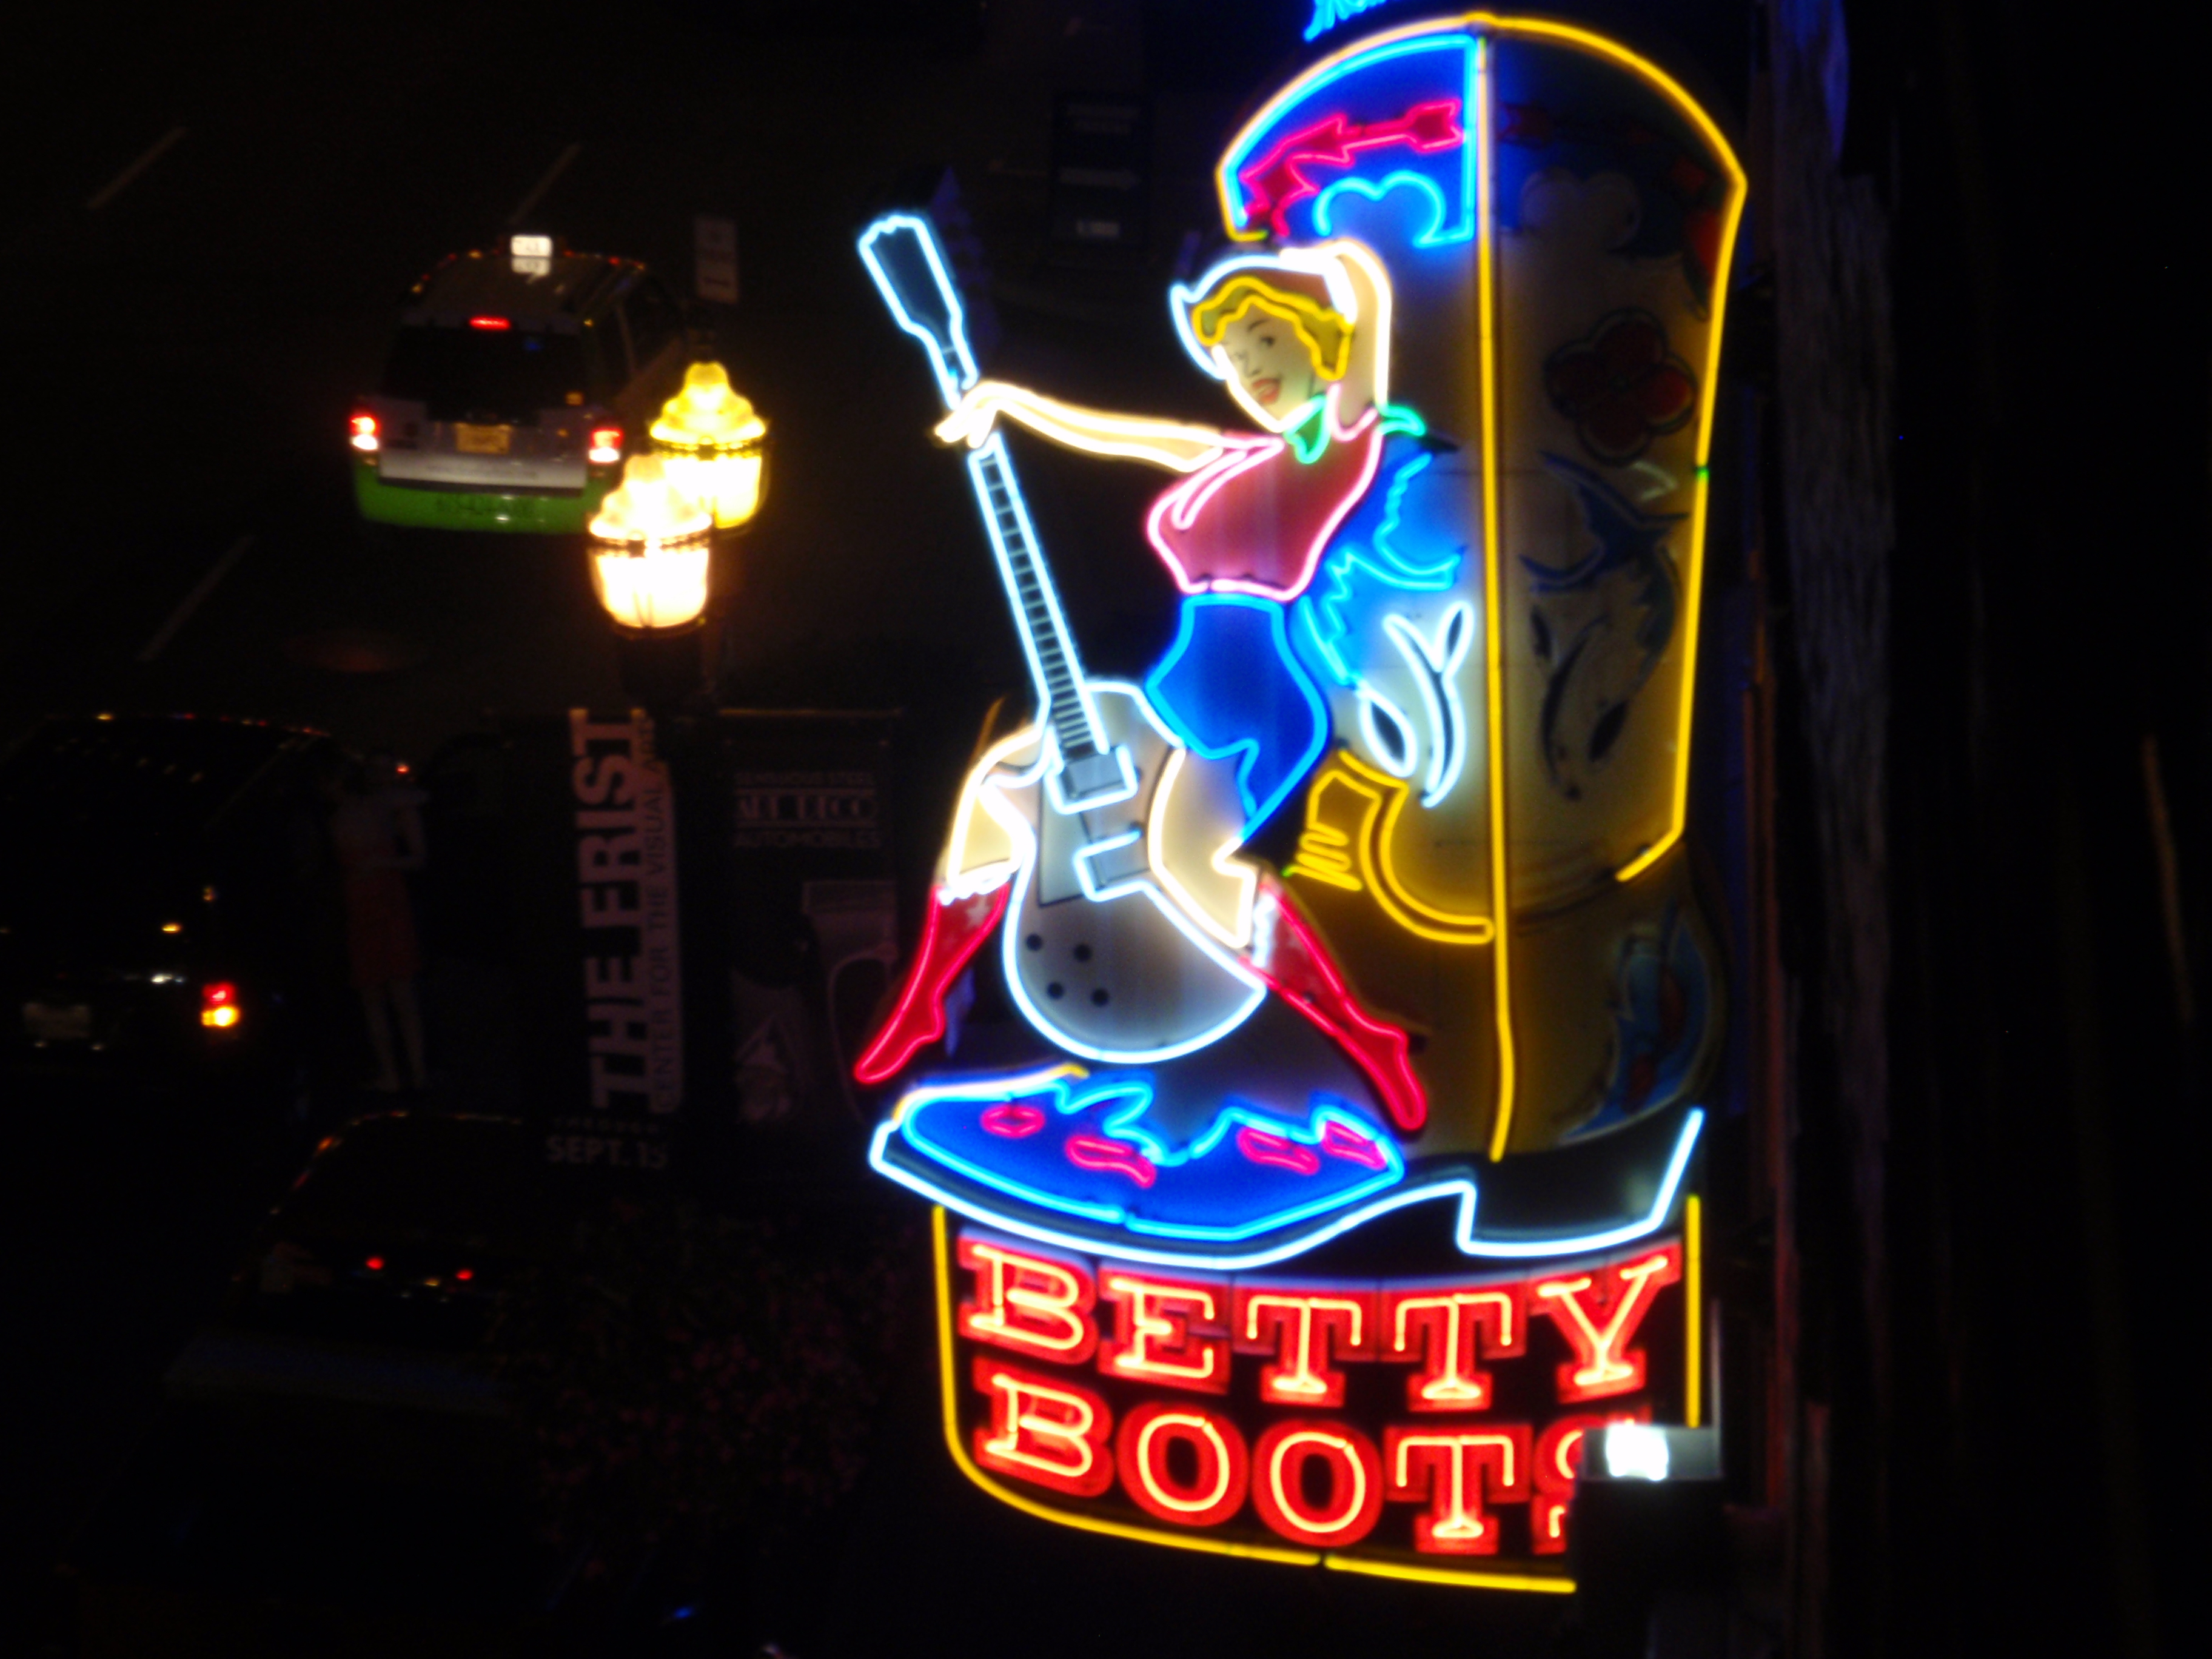 Betty Boots